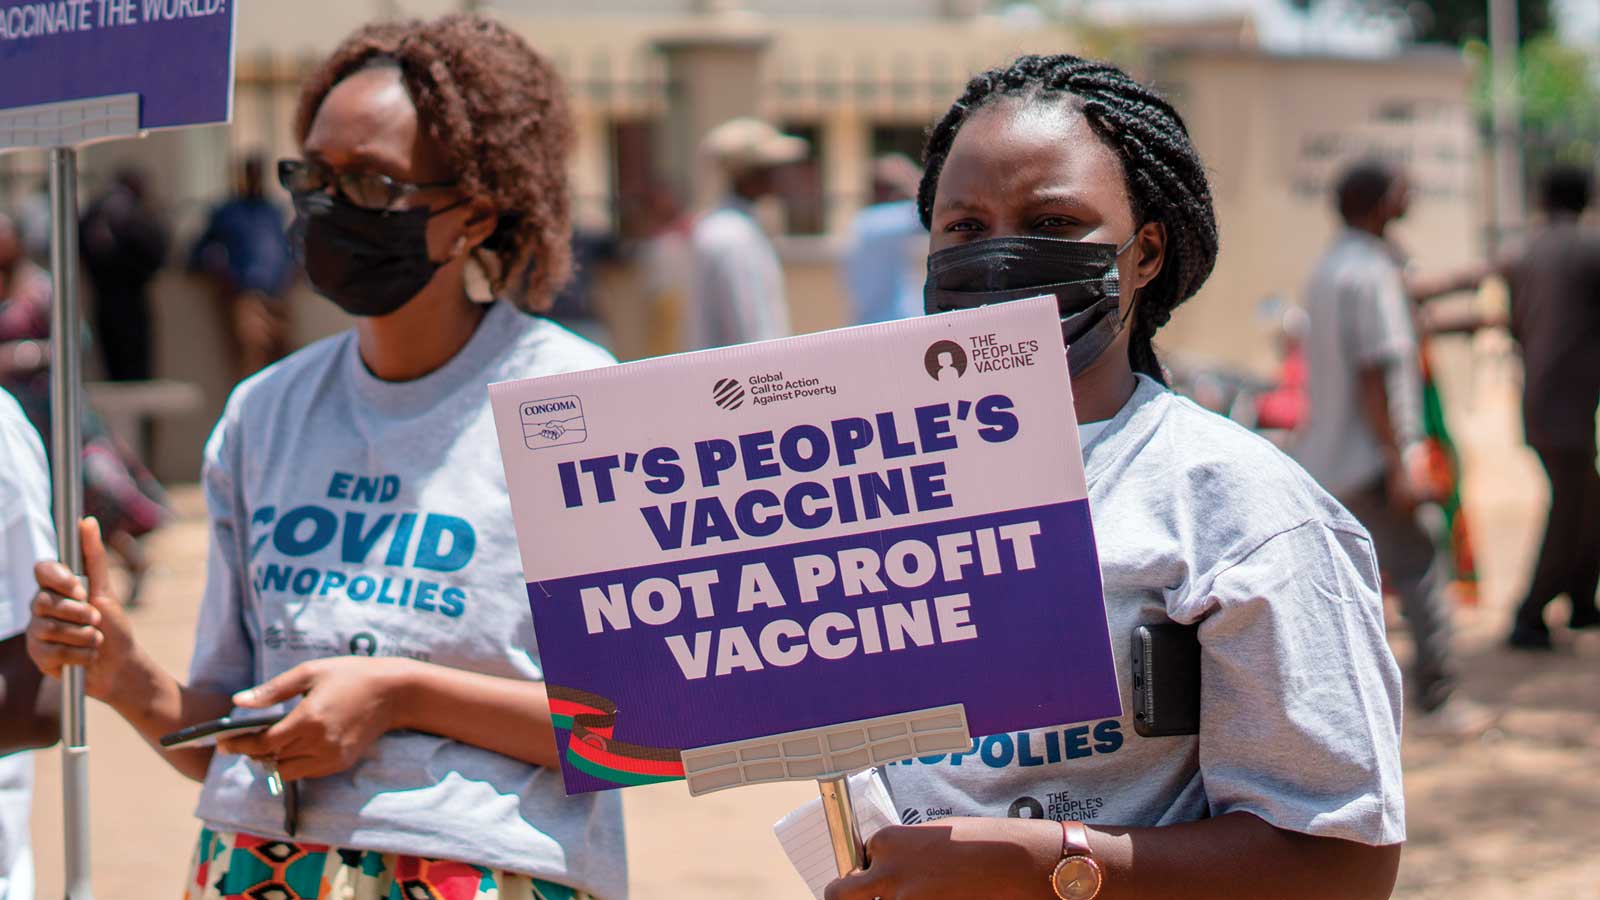 A Black woman wearing a medical mask holds a sign that reads “It’s people’s vaccine. Not a profit vaccine.” She’s surrounded by other demonstrators on a sunny day.